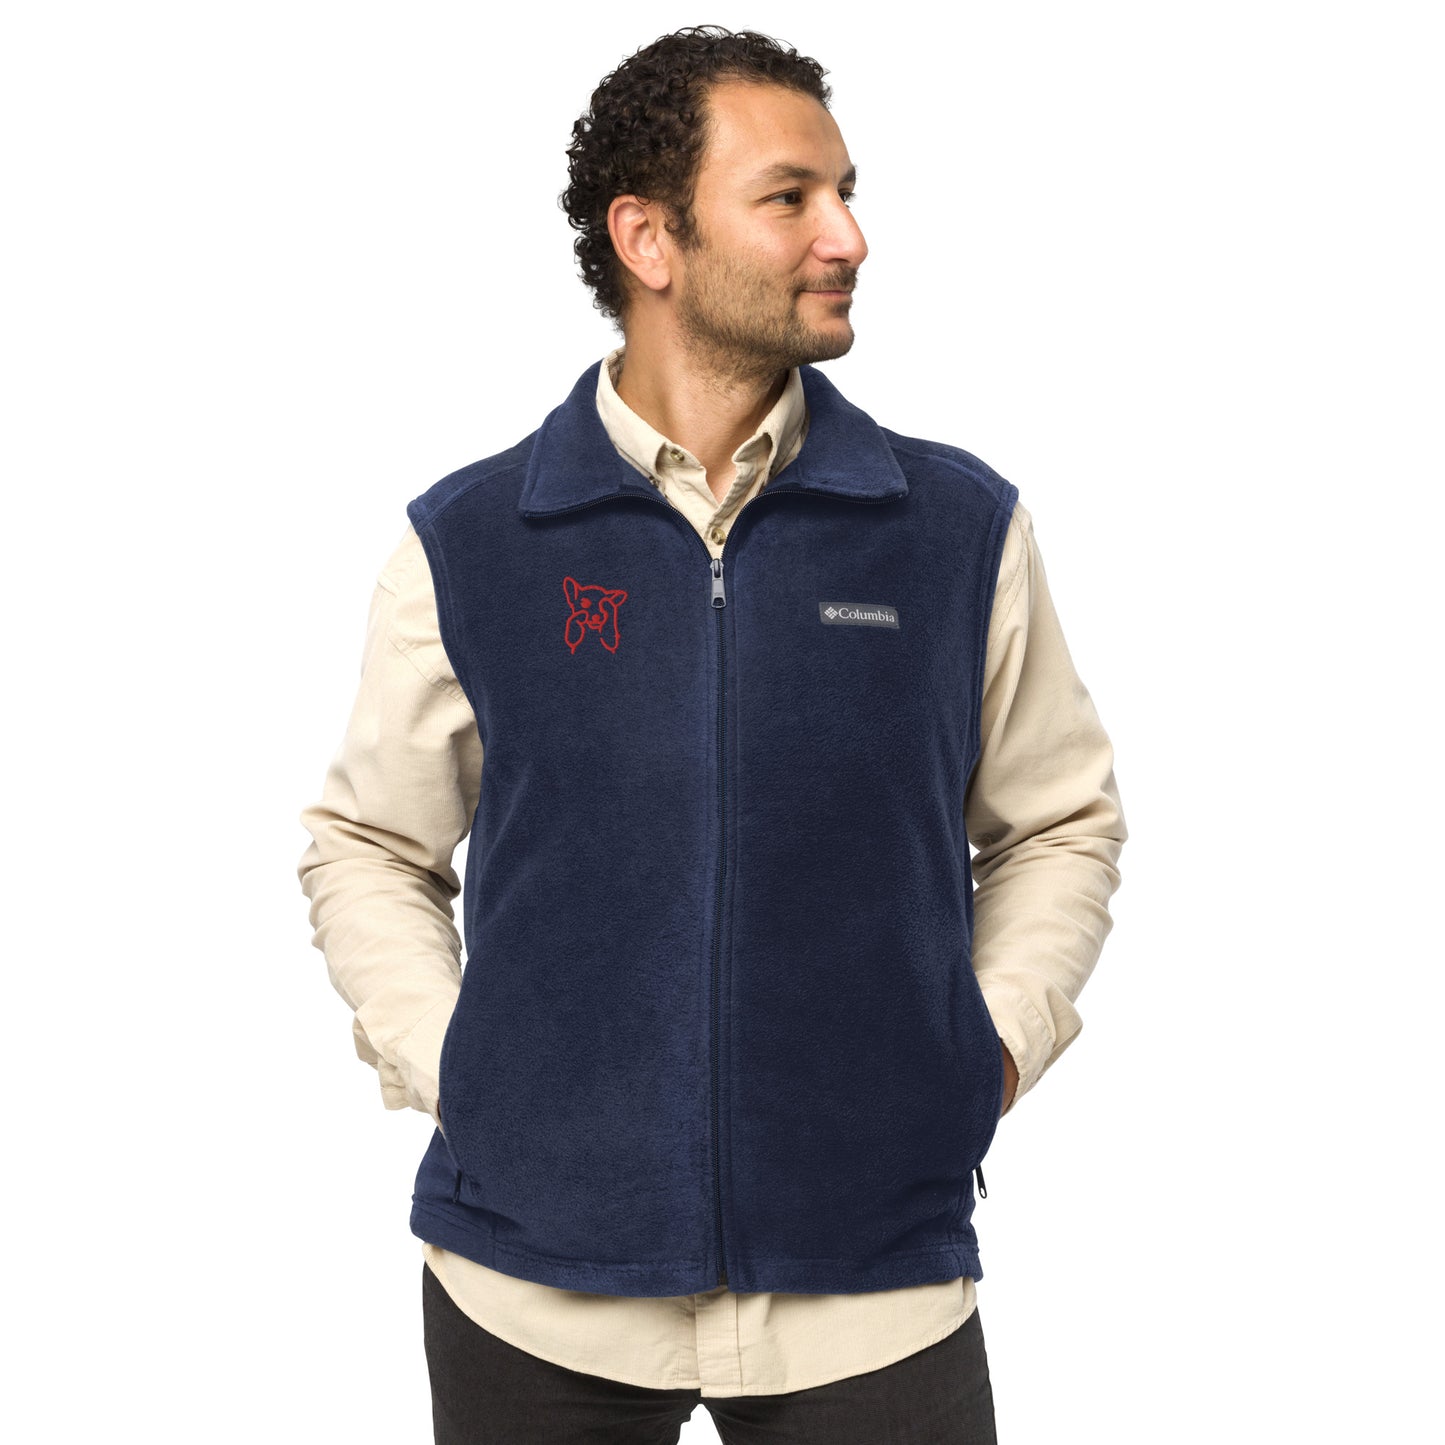 Men’s Columbia fleece vest , flat embroidery, red color cute dog sketch